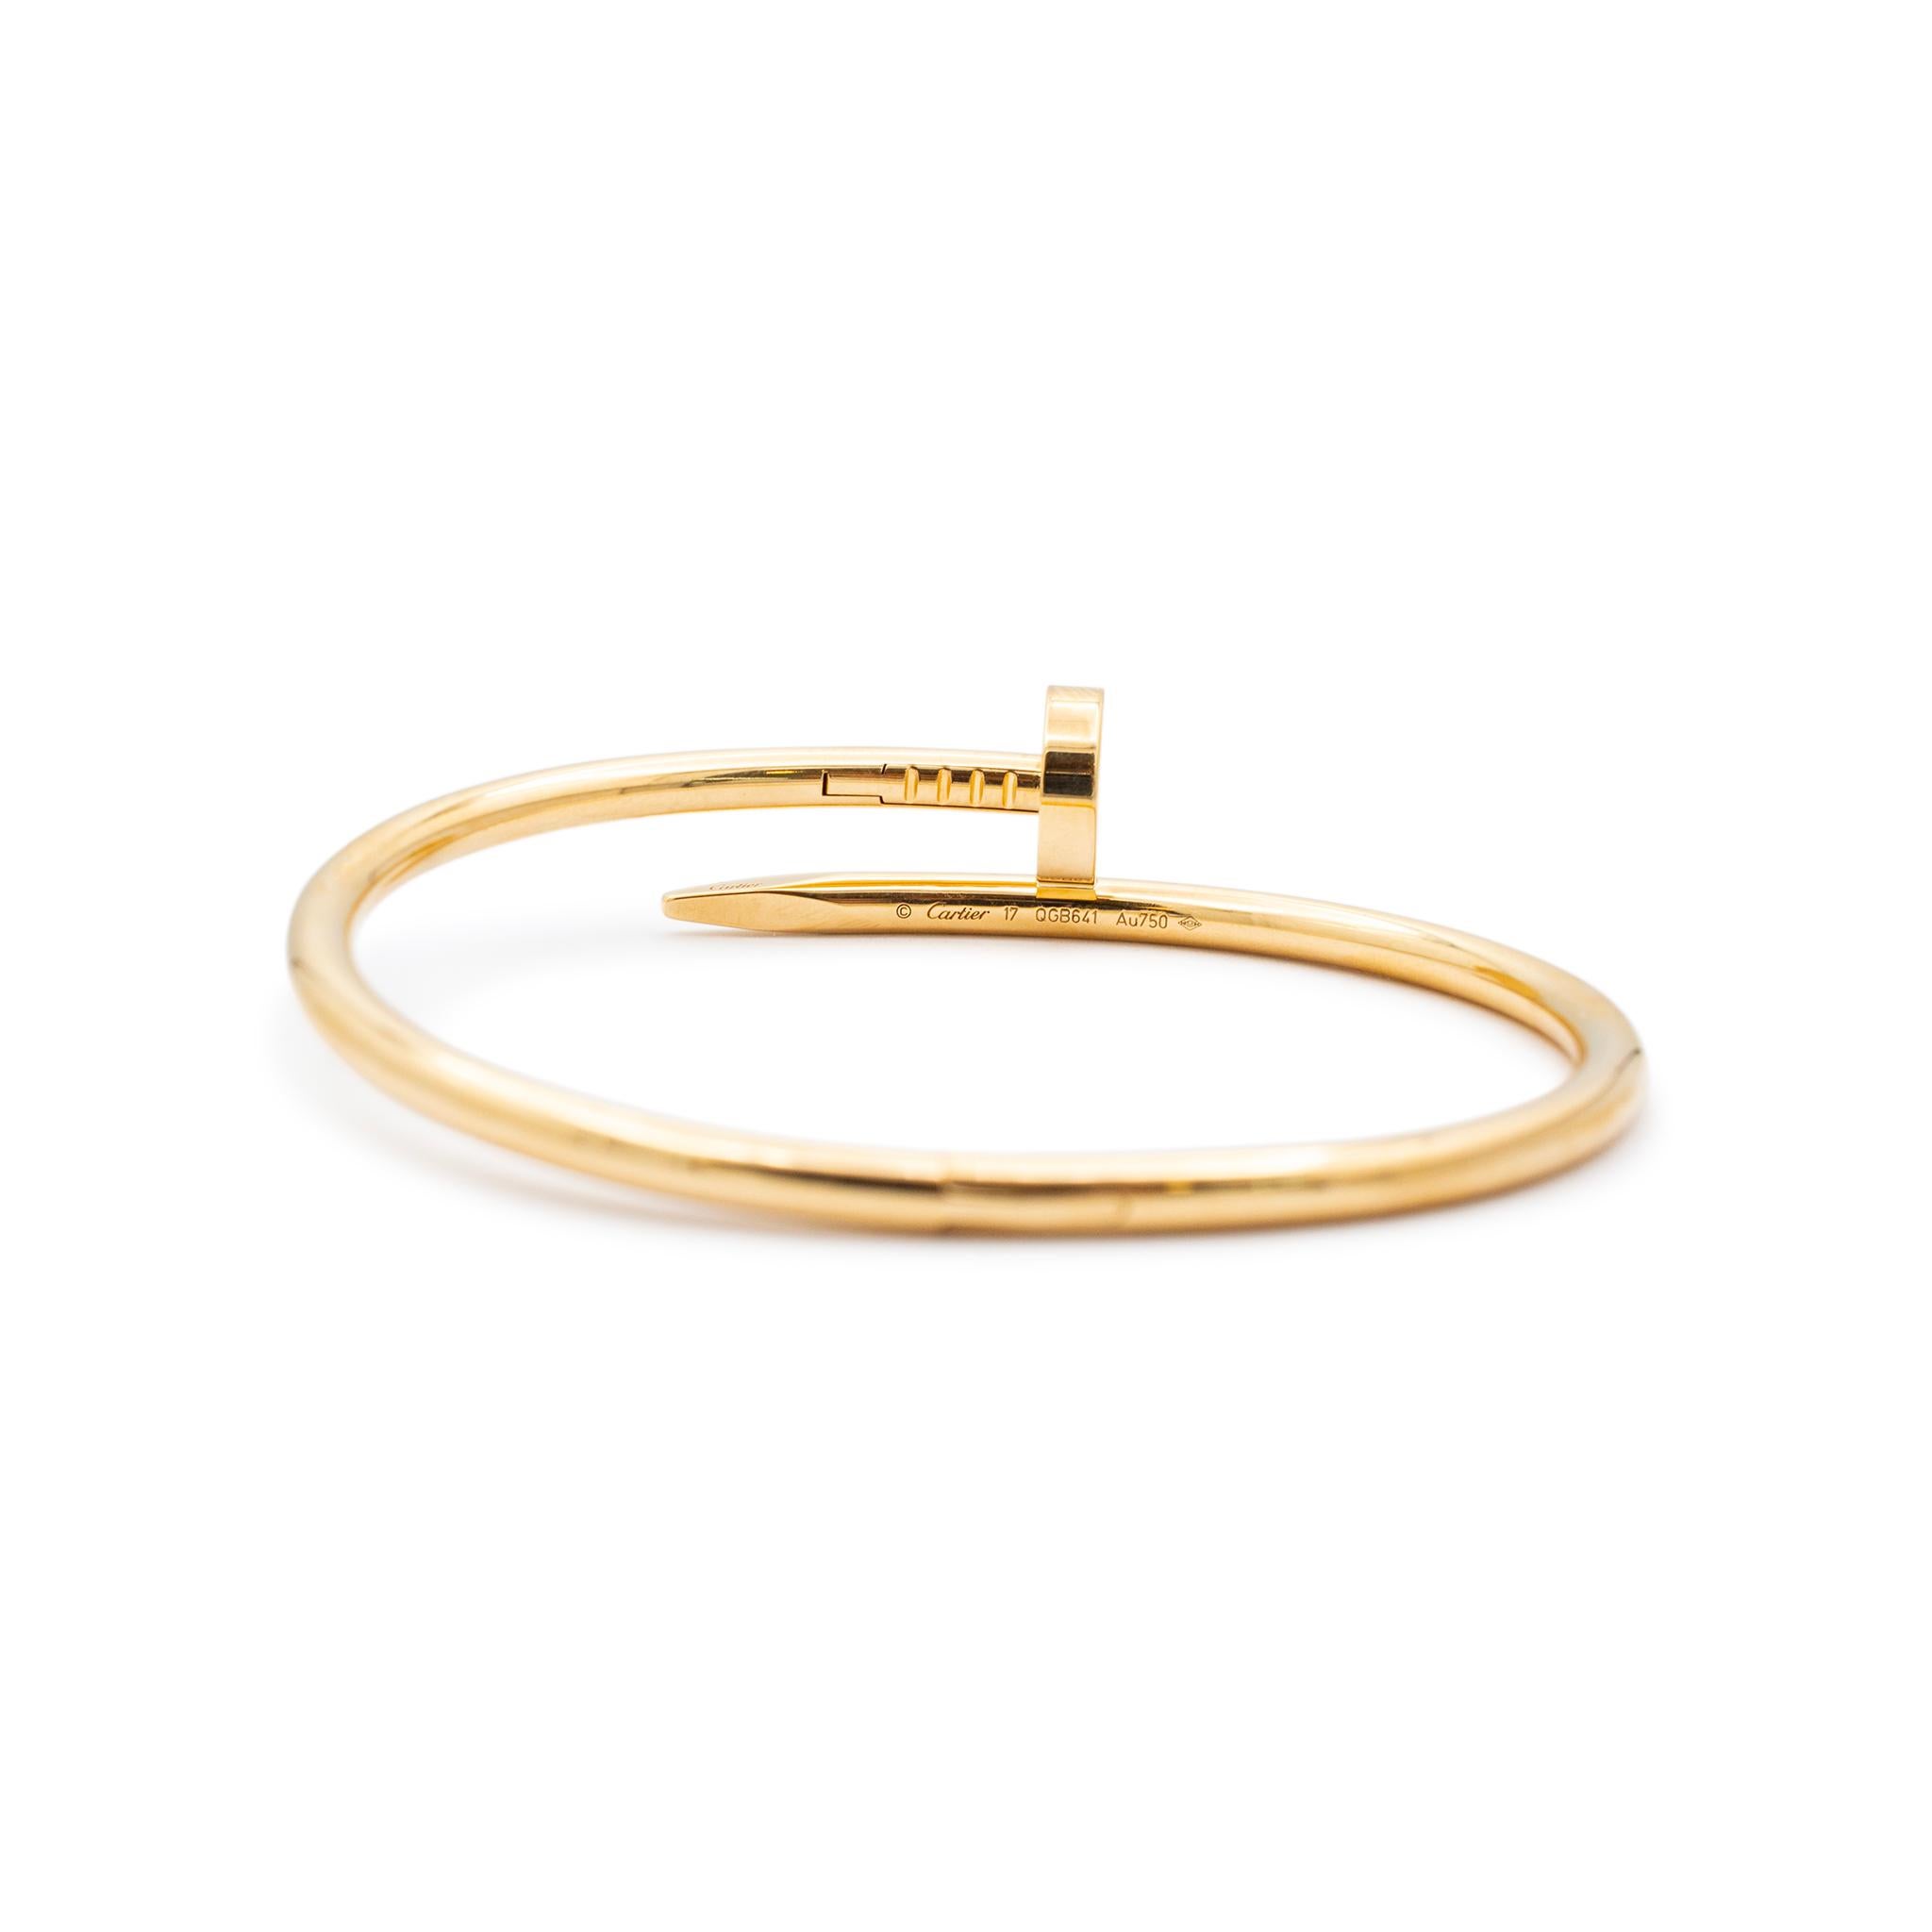 Brand: Cartier

Gender: Ladies

Metal Type: 18K Yellow Gold

Cartier Size: 17

Length: 6.00 Inches

Width: 3.50 mm

Weight: 32.90 grams
Ladies 18K yellow gold bangle bracelet. The metal was tested and determined to be 18K yellow gold. Engraved with